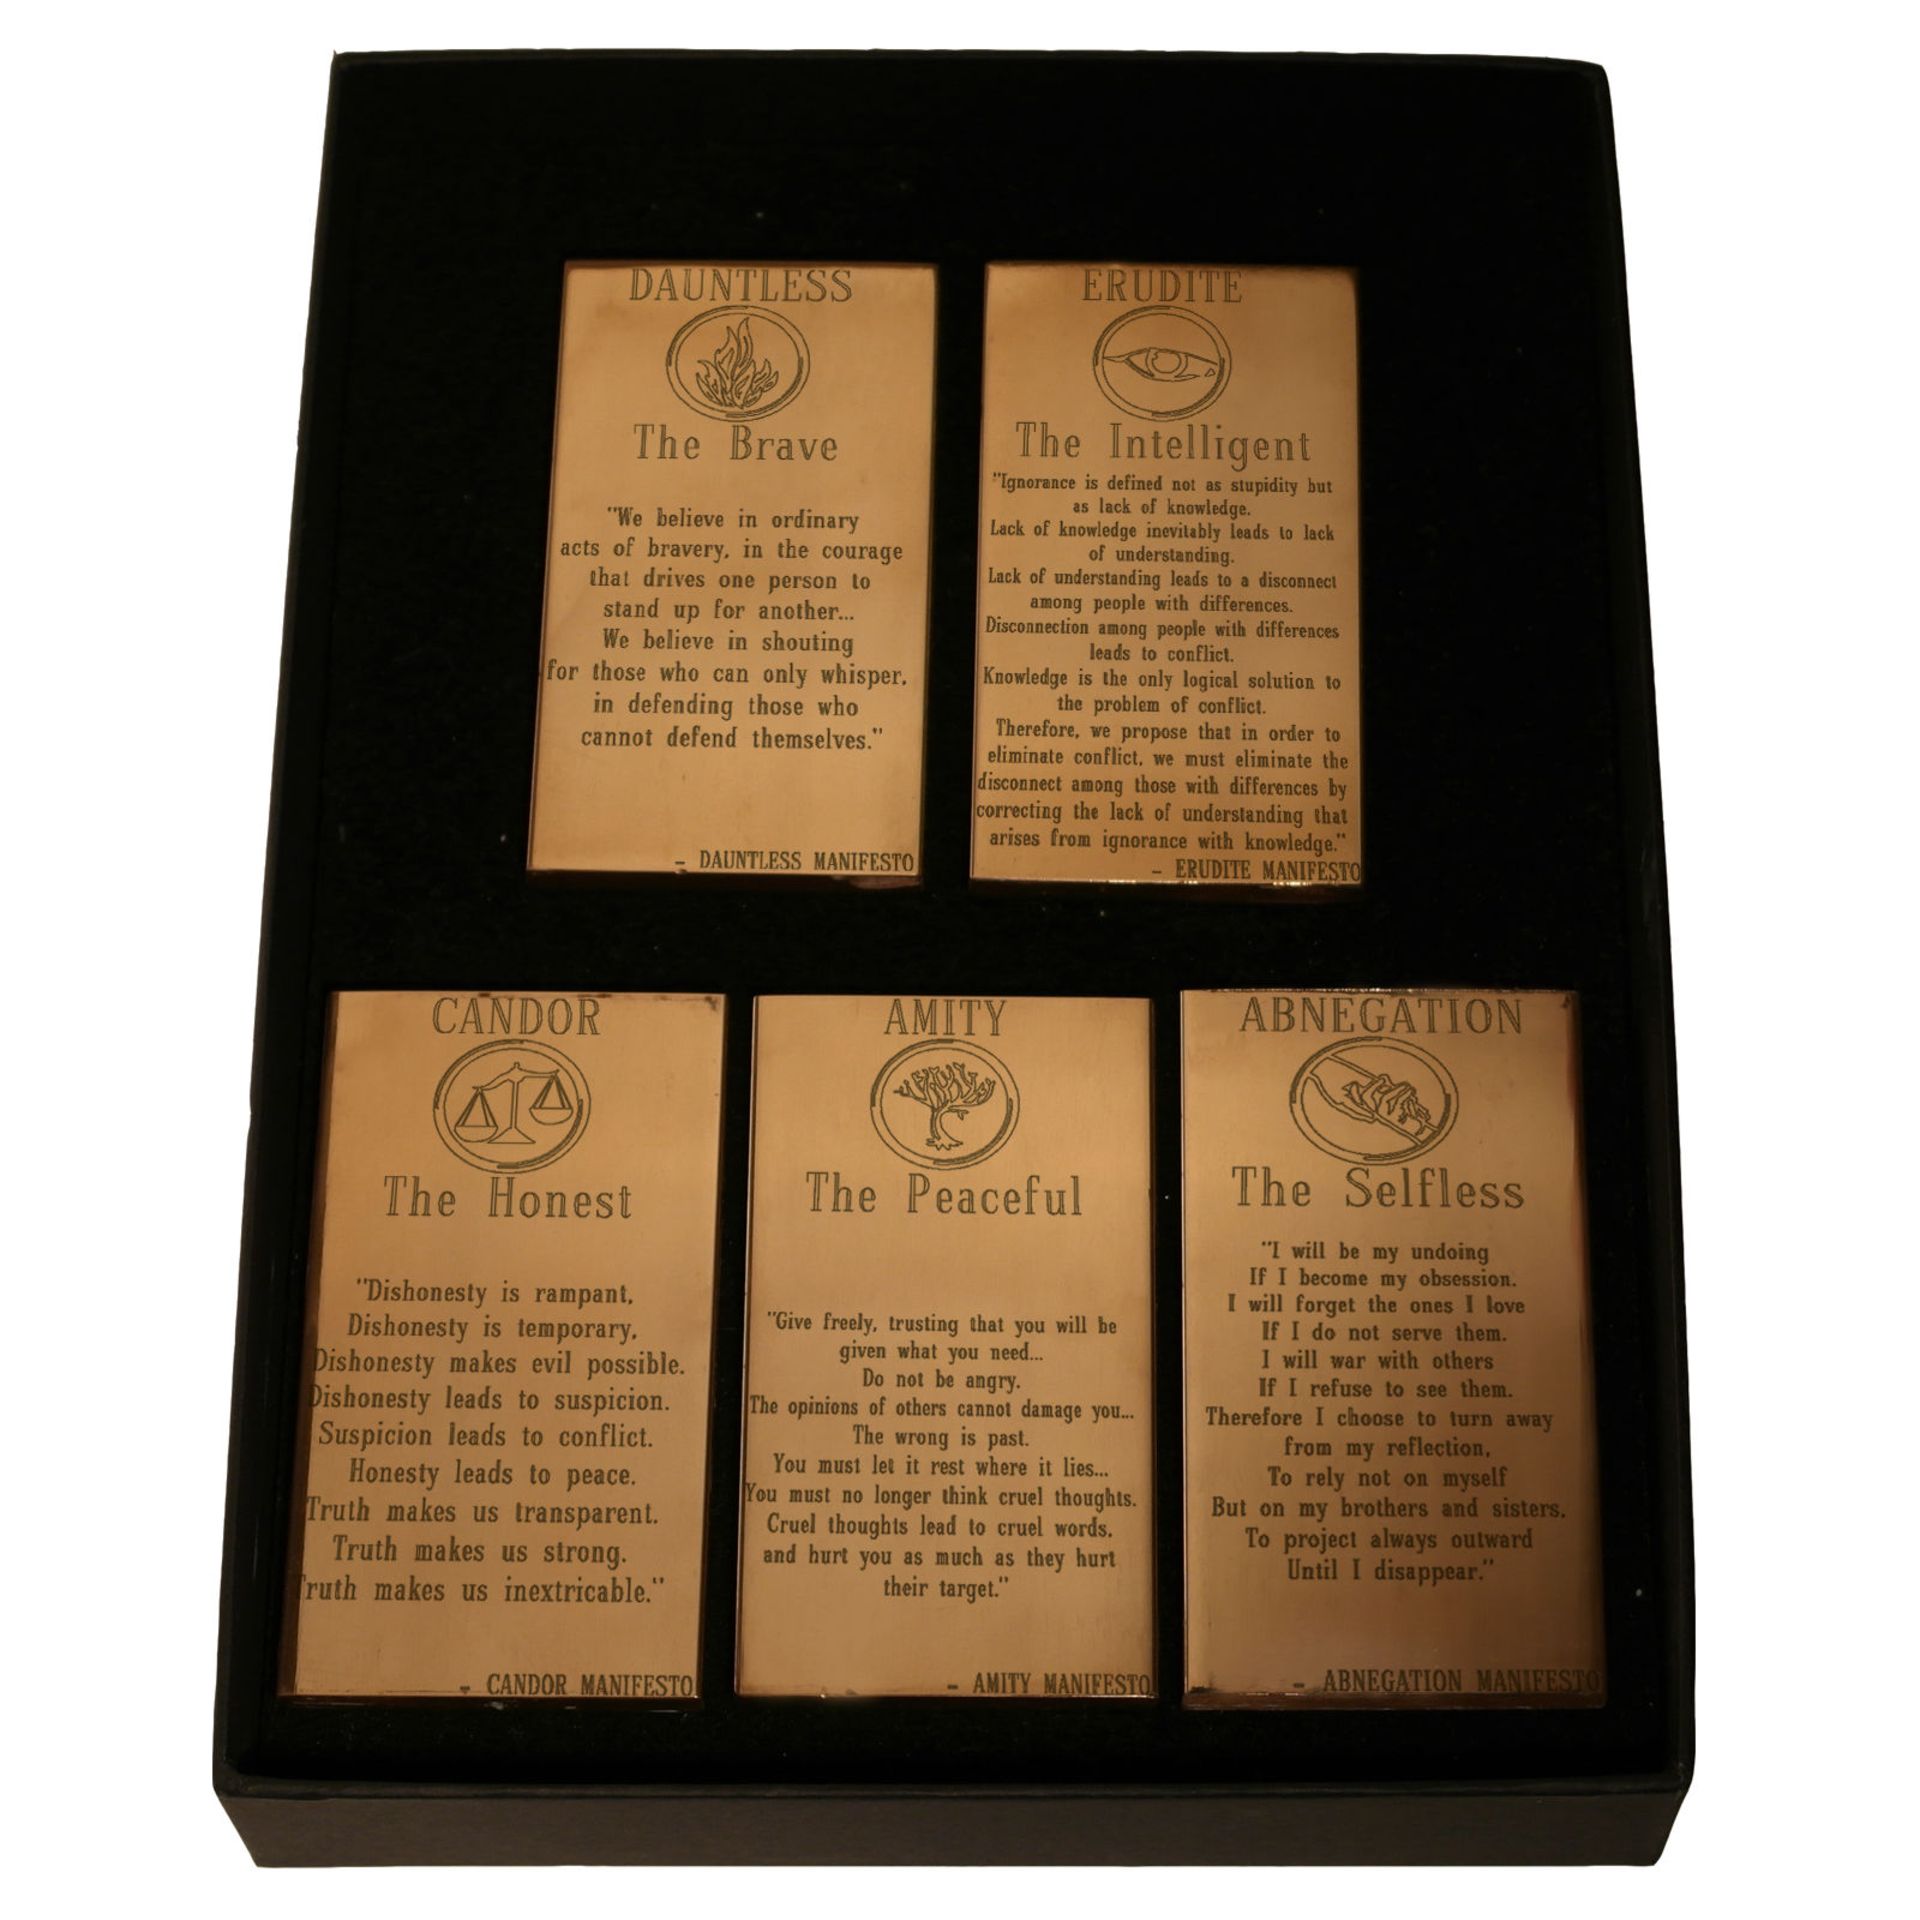 .999 COPPER BULLION 1/2LB - rare collectors item GIFT FOR THE MAN (OR WOMAN) WHO HAS EVERYTHING! All